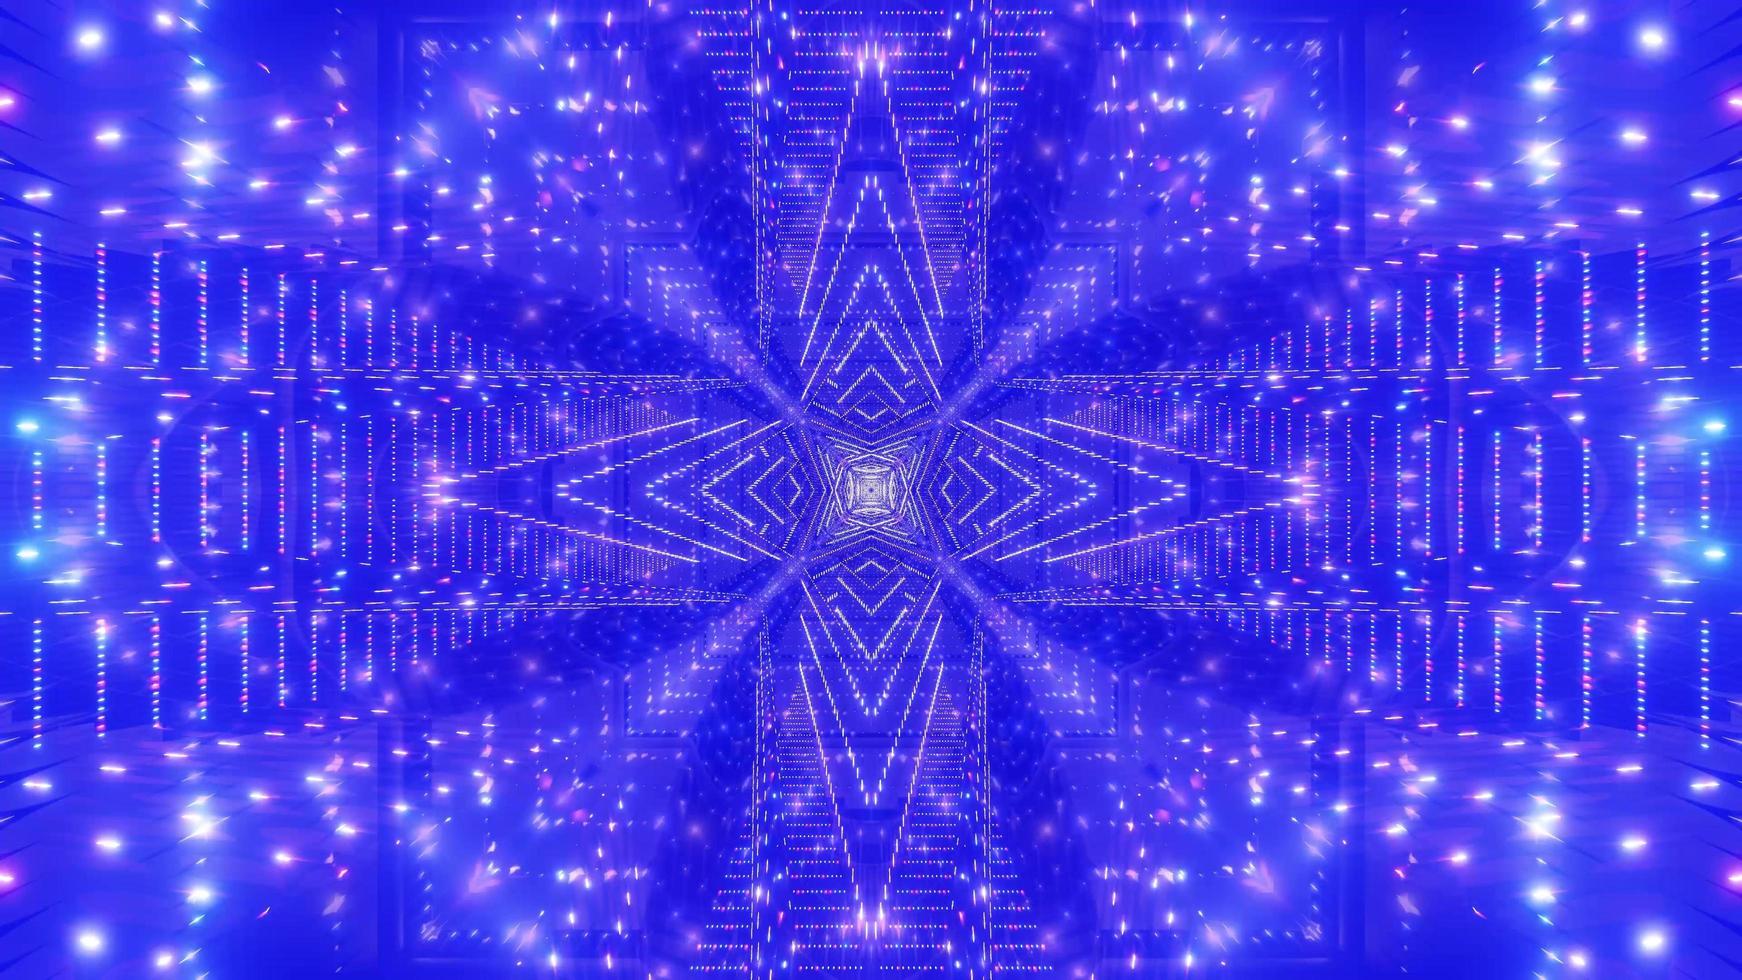 Blue, white, and green light and shapes kaleidoscope 3d illustration for background or wallpaper photo